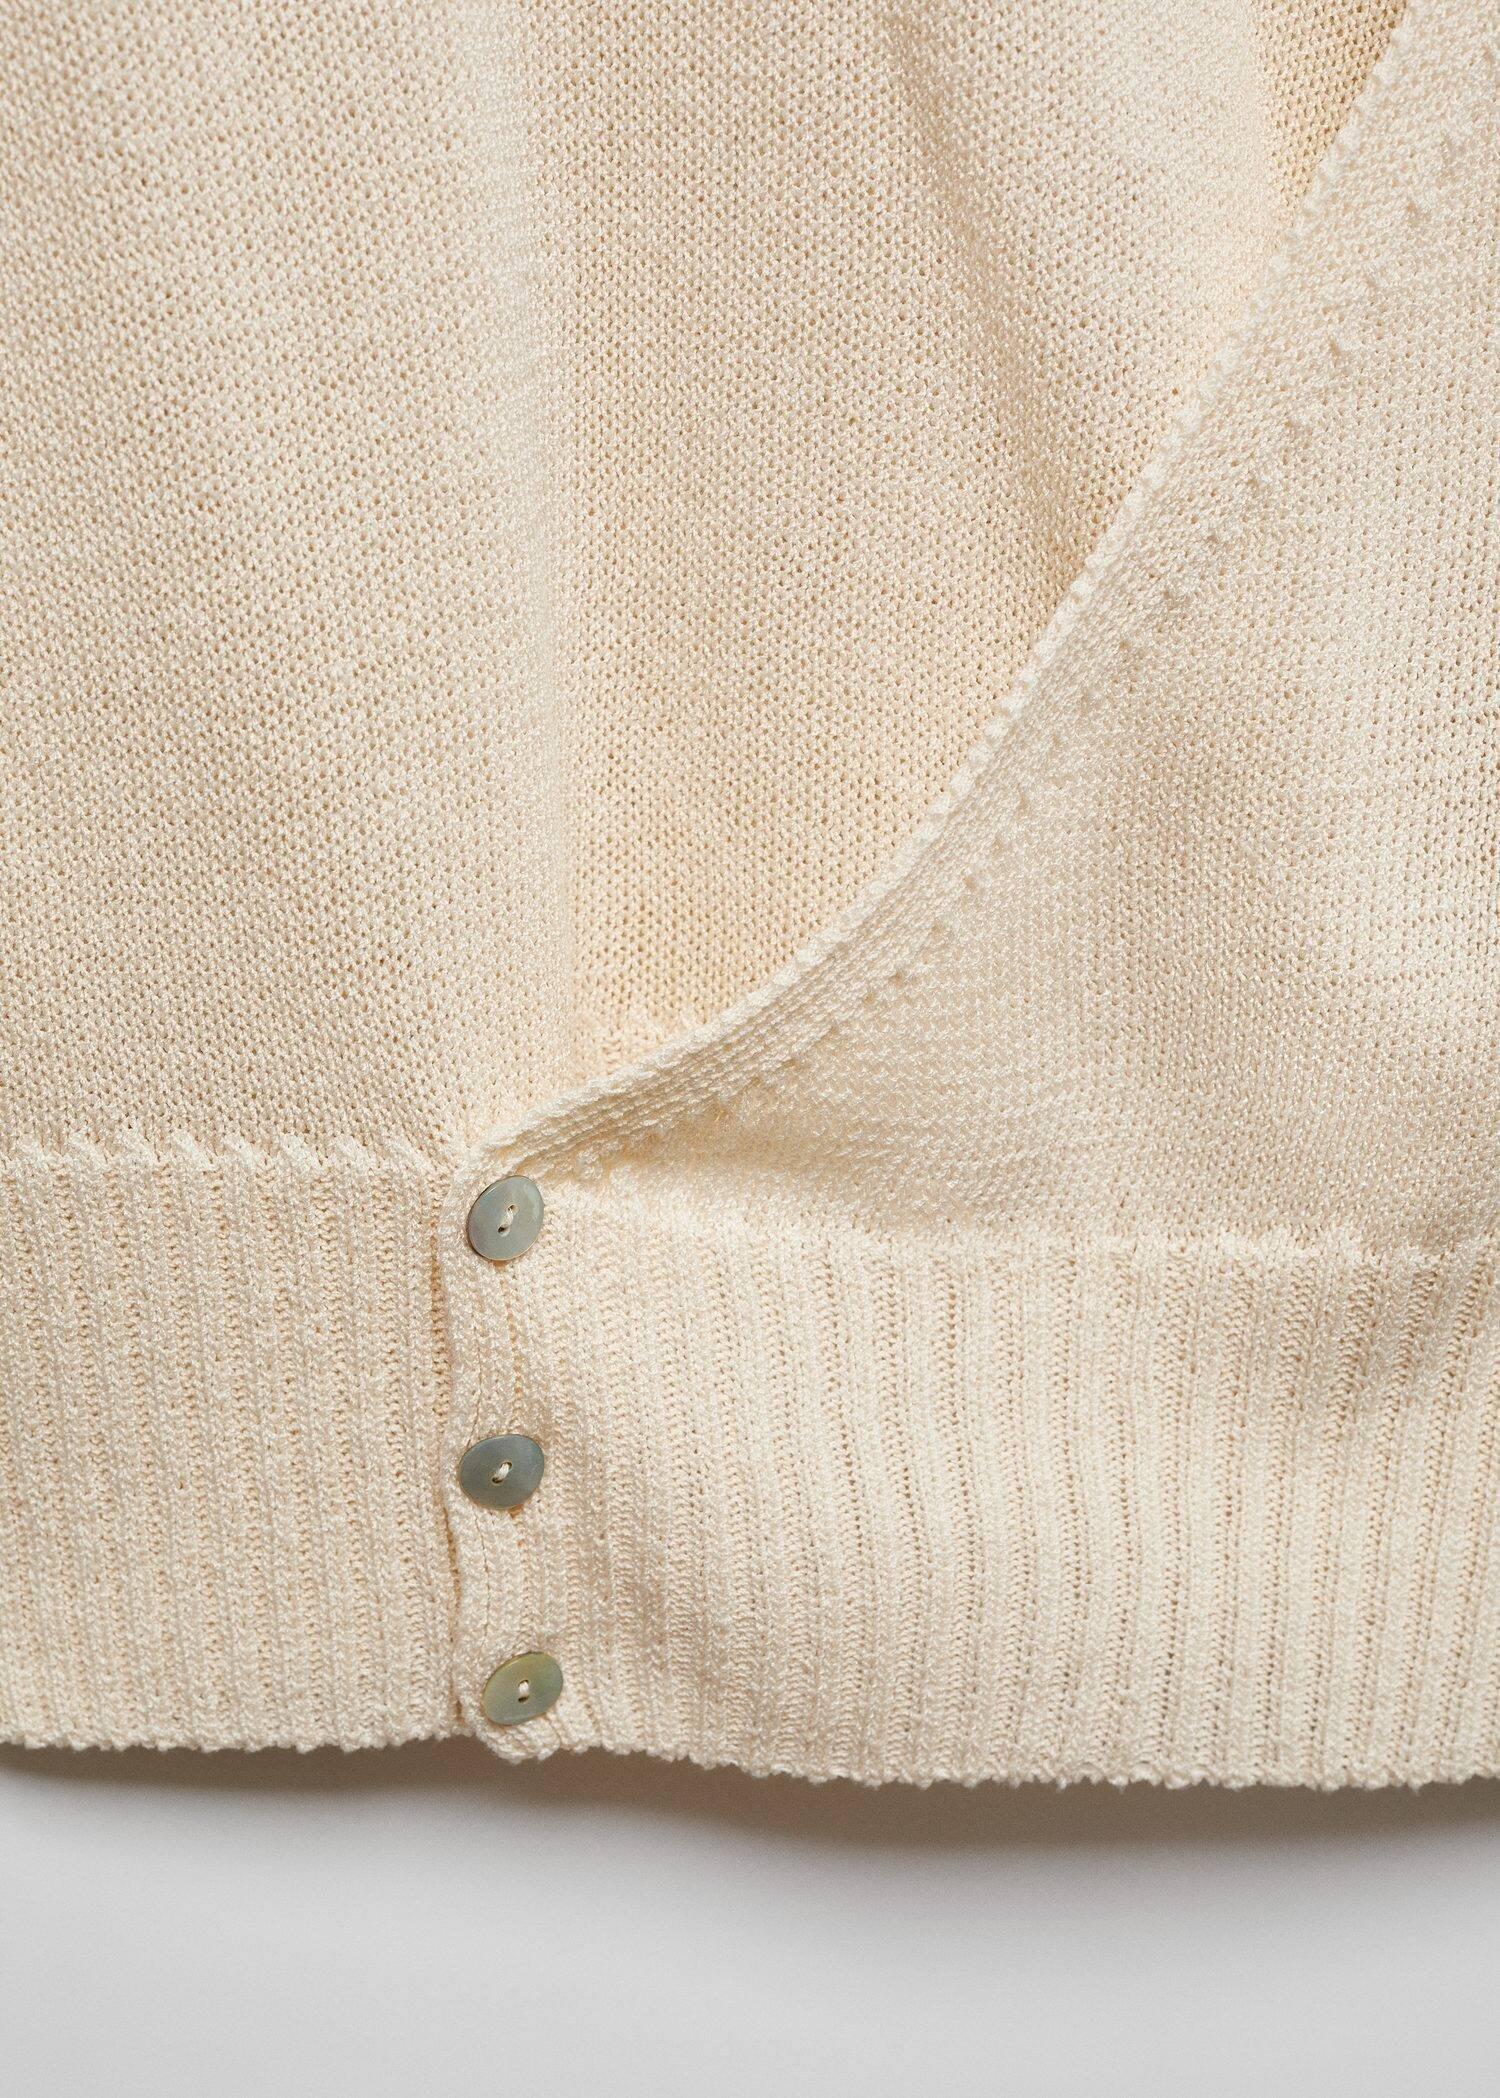 Mango - Beige Pullover Crossover With Slit Detail